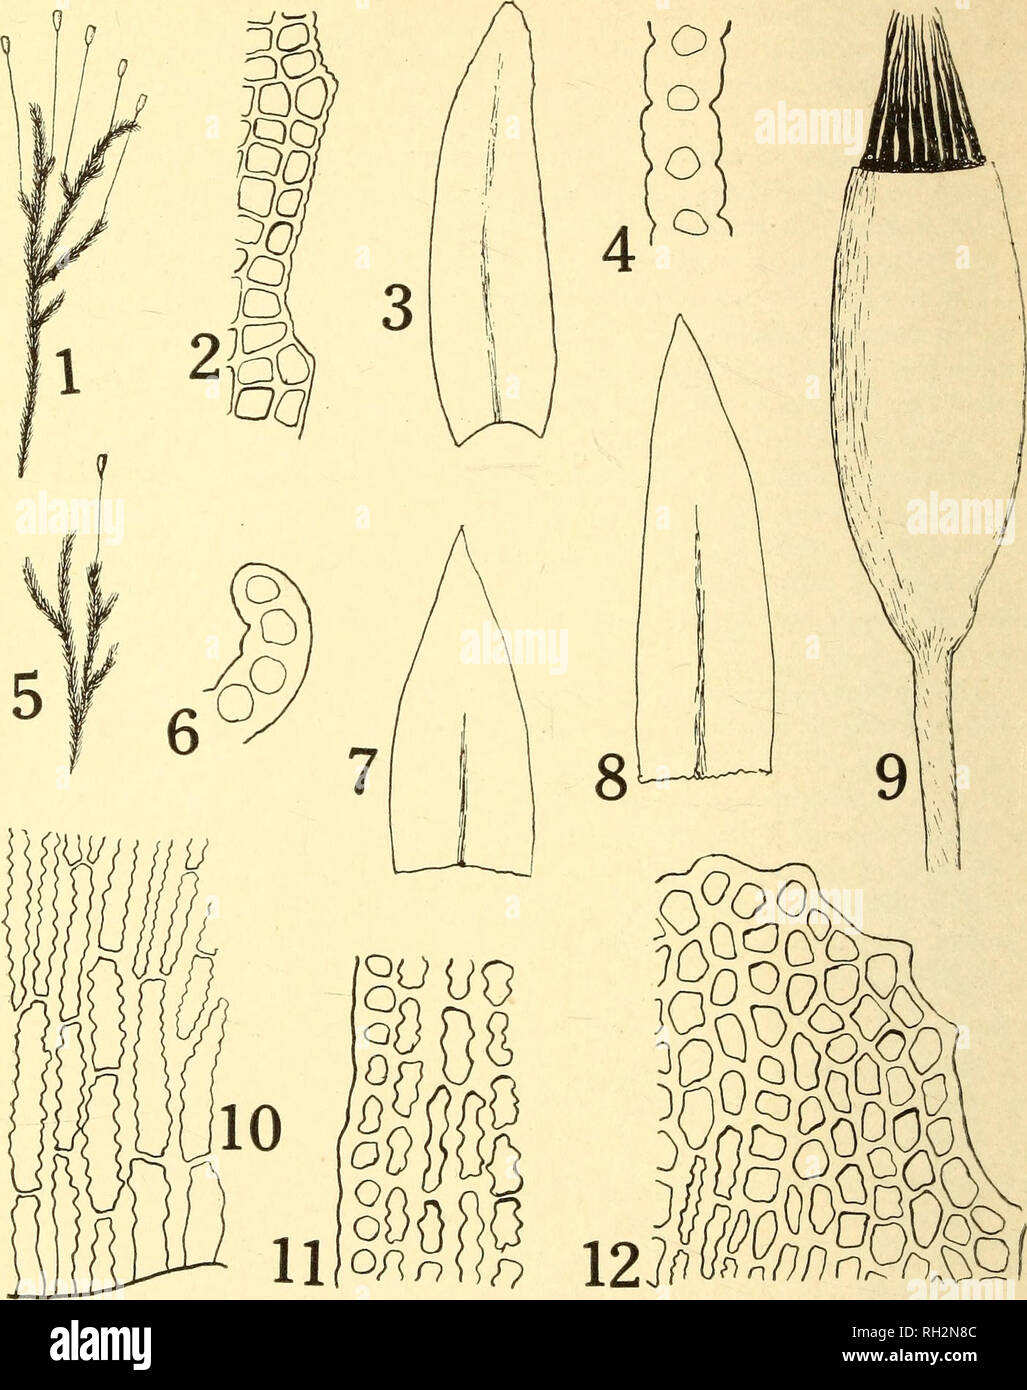 . The Bryologist. Mosses; Liverworts; Lichens; Botany; Bryology. -96-. Plate XXI. Rhacomitrium aciciilare. (t) Plant, Xi. {2) Leaf-margin near tip, X400. (3) Leaf, Xi7- (4) Portion of cross section through lower part of leaf, X5S0. (5) Plant, Xi. (6) Cross section through leaf-margin near tip, XSSo. (7), (8) Inner perichaetial leaves, X17. (9) Capsule, X17. (10) Cells of leaf-base, X-100. (11) Cells of leaf-middle, X400. (12) Cells of leaf-tip, X400. cylindric, not narrowed at the mouth, its body 2.2-2.6 mm. long. Peristome teeth usually divided into 3 or rarely 2 divisions; divisions unequal, Stock Photo